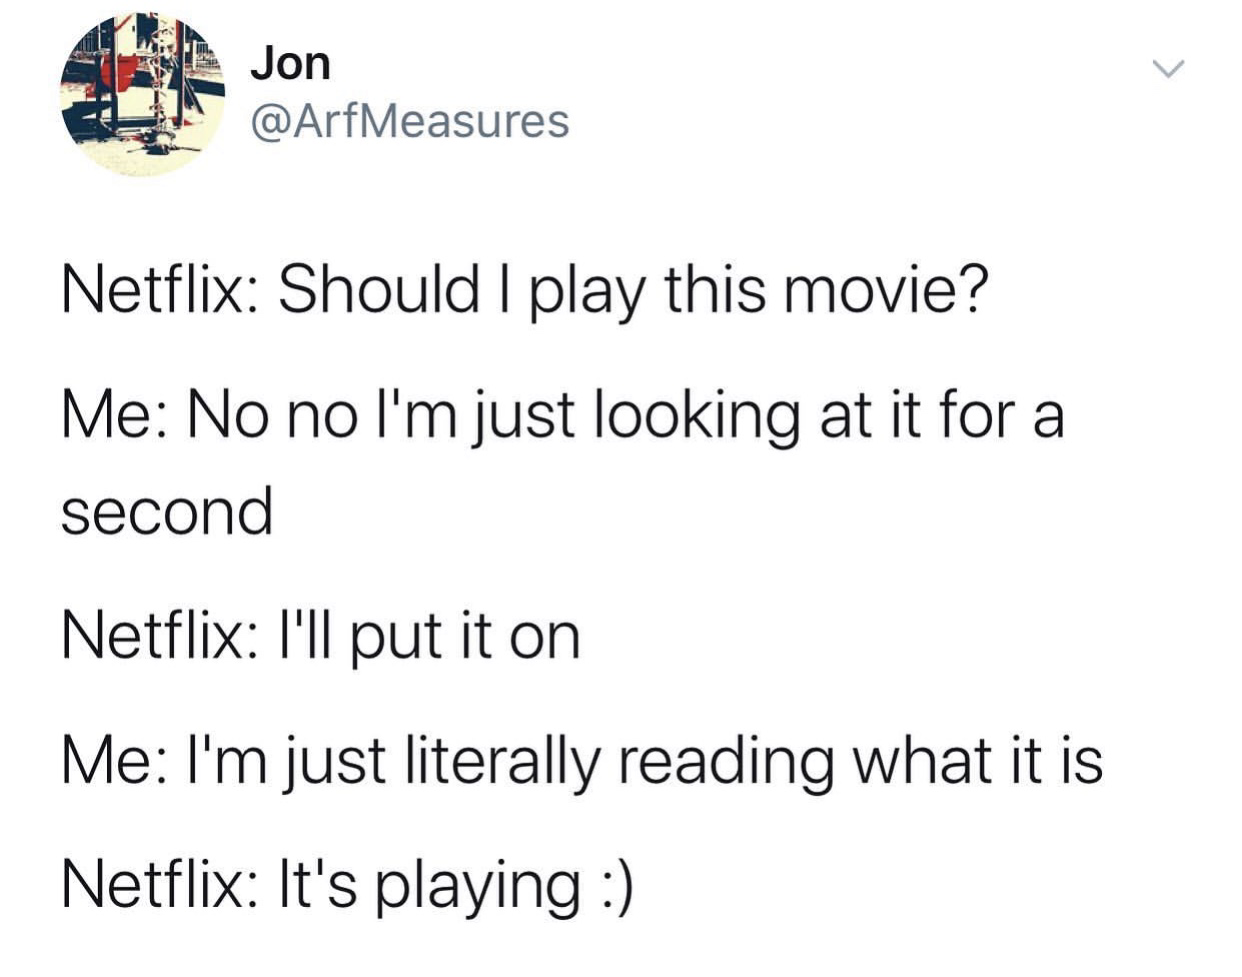 document - Jon Netflix Should I play this movie? Me No no I'm just looking at it for a second Netflix I'll put it on Me I'm just literally reading what it is Netflix It's playing